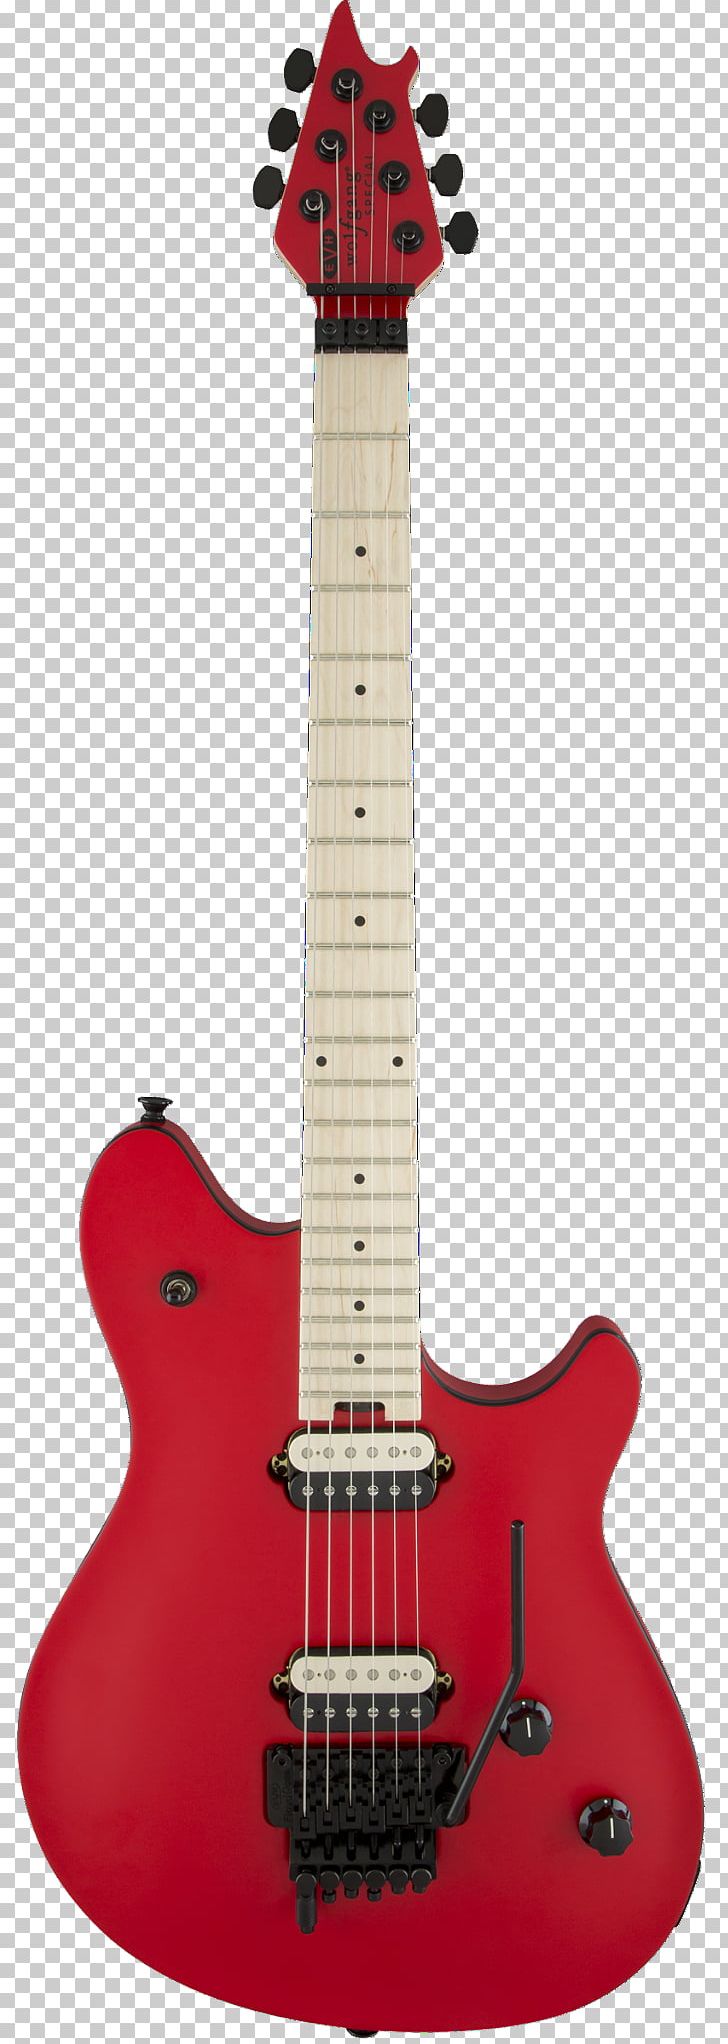 Ibanez RG Epiphone G-400 Electric Guitar Musical Instruments PNG, Clipart, Acoustic Electric Guitar, Bass Guitar, Eddie Van Halen, Electric Guitar, Guitar Accessory Free PNG Download